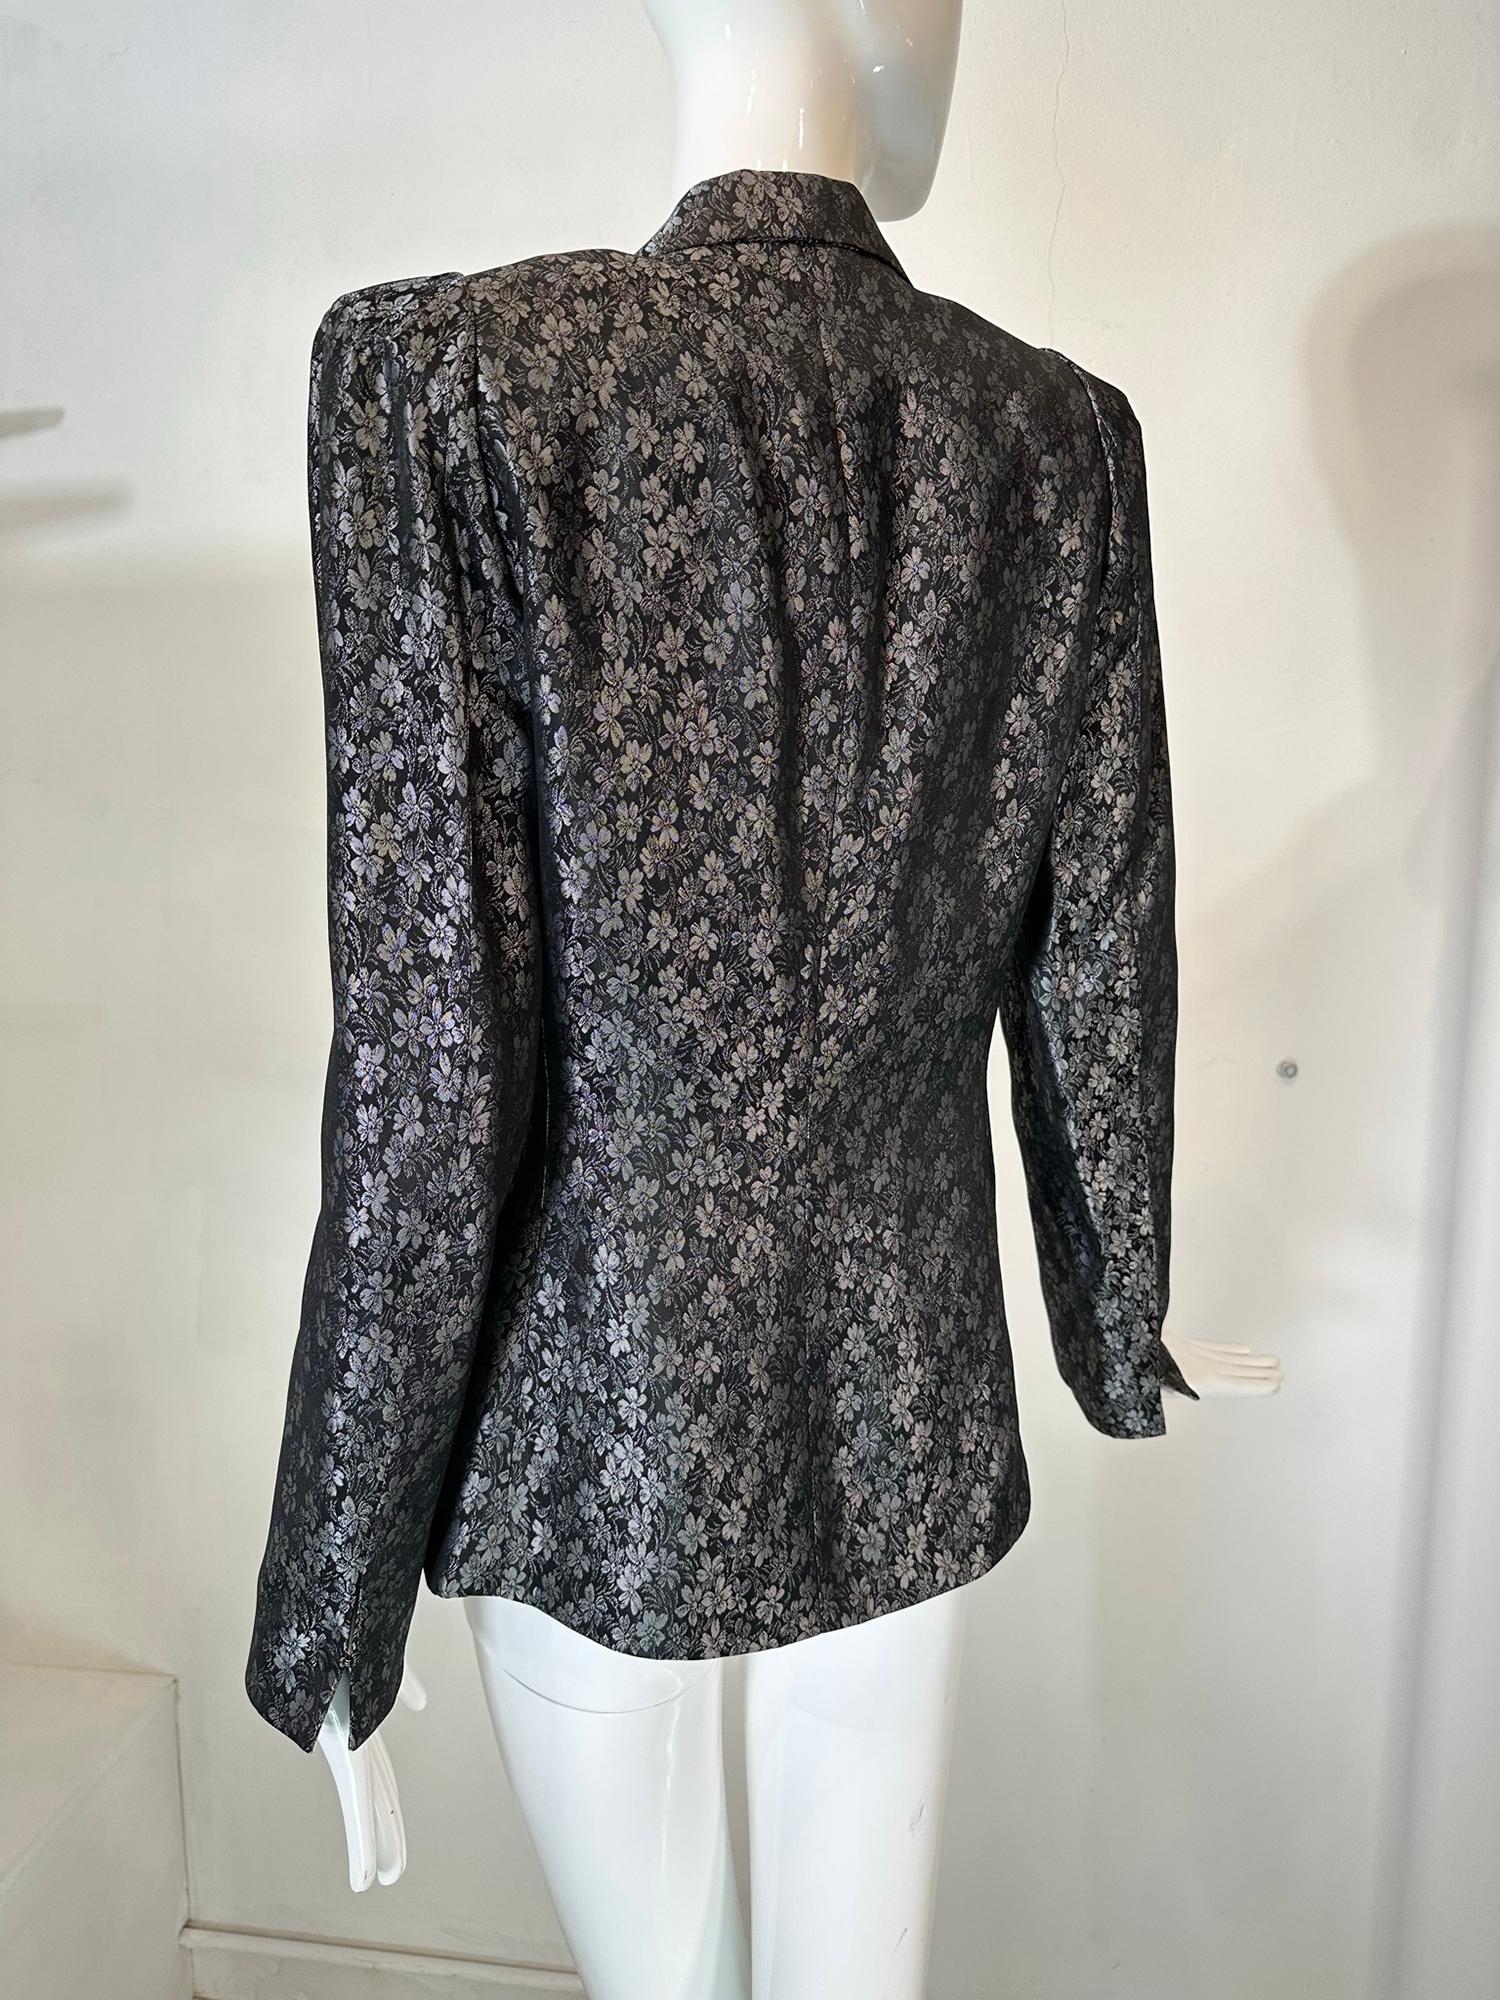 Richard Tyler Black & Silver Brocade Tailored Single Breasted Jacket 1990s For Sale 4